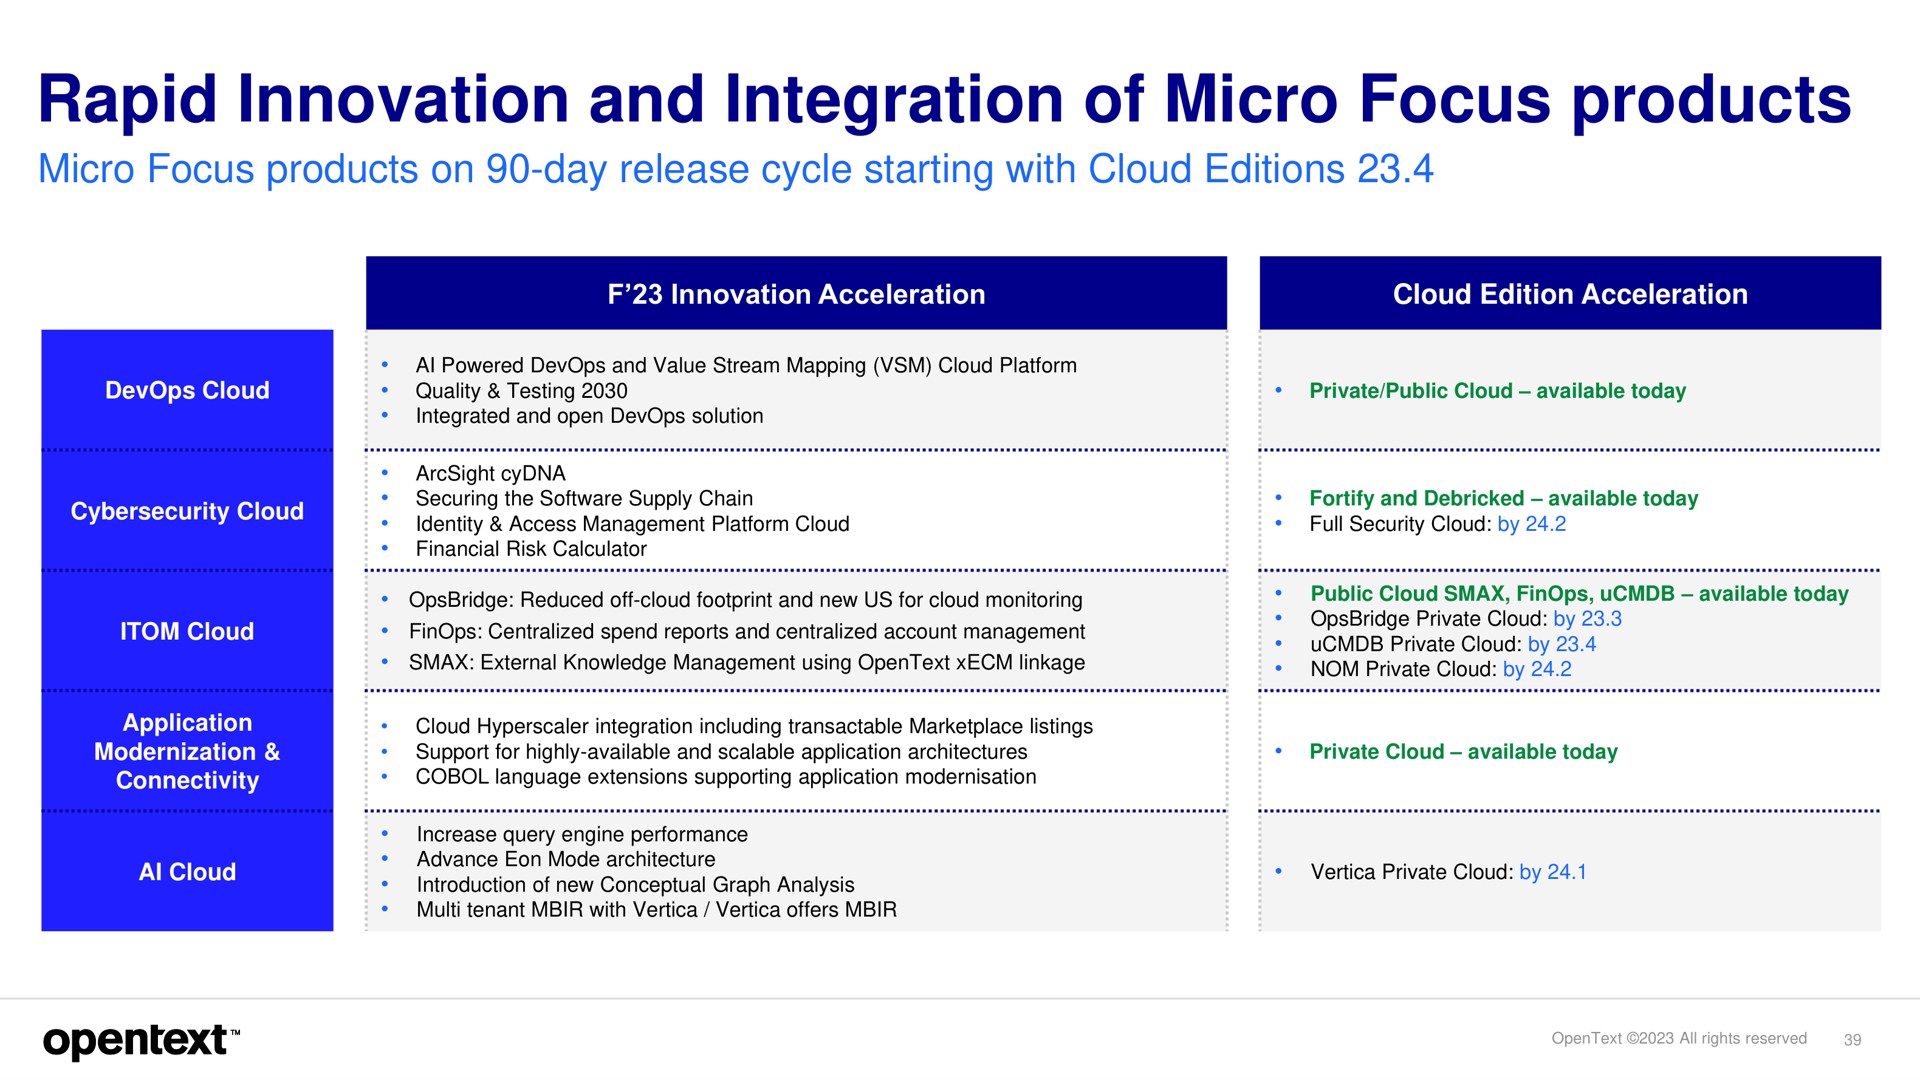 rapid innovation and integration of micro focus products | OpenText